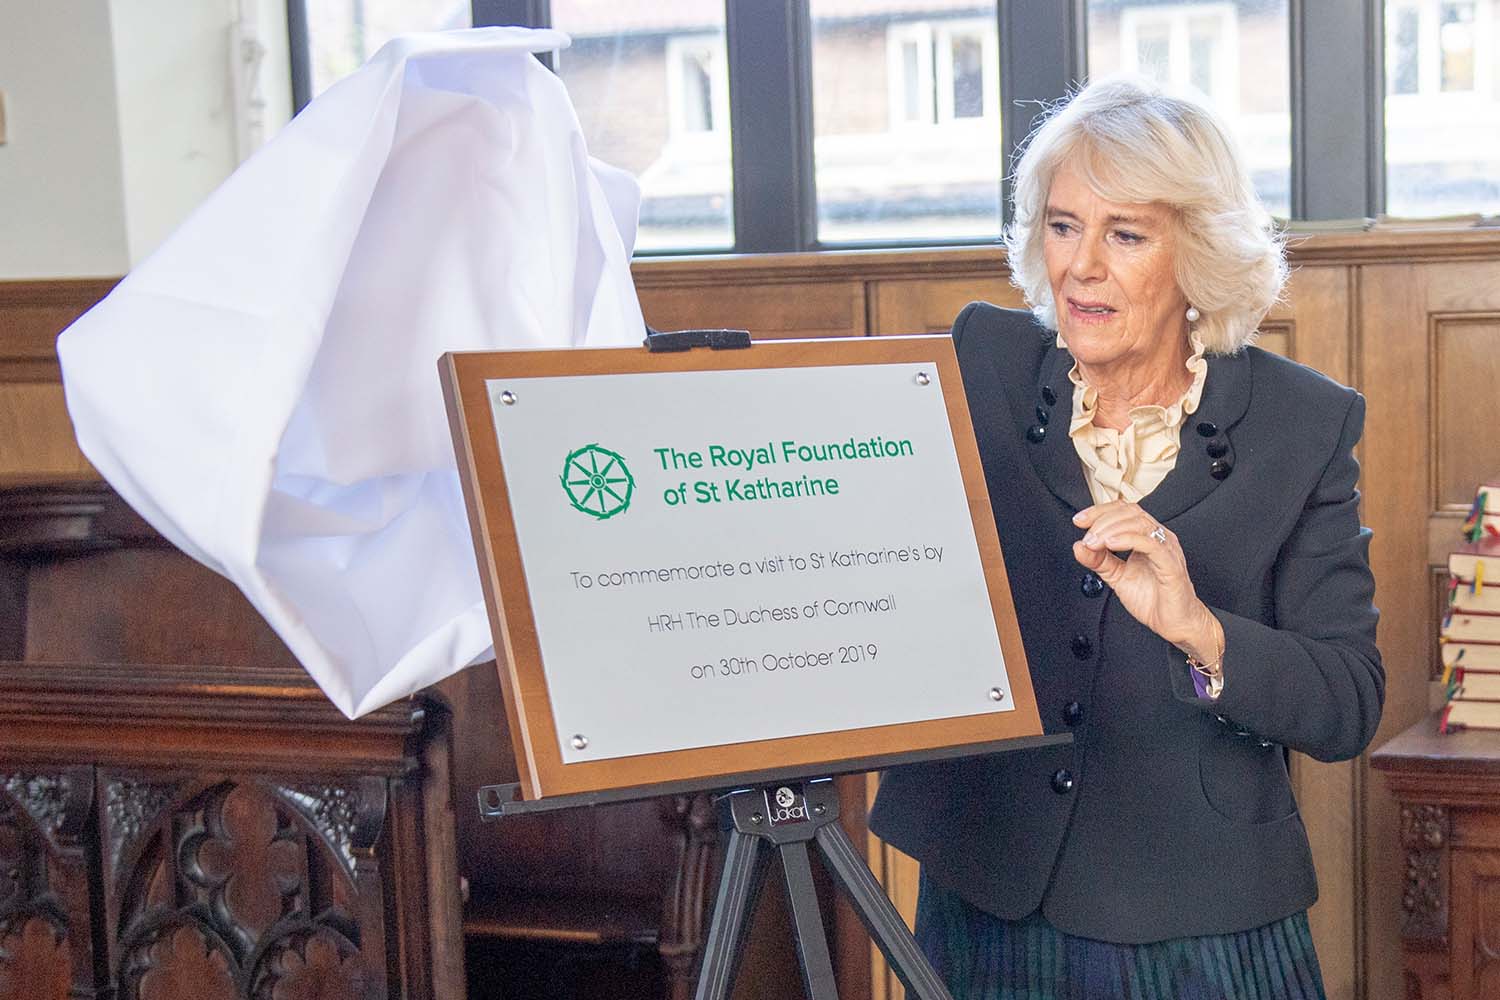 Camilla, Duchess of Cornwall pays a visit to the Royal Foundation of St Katharine